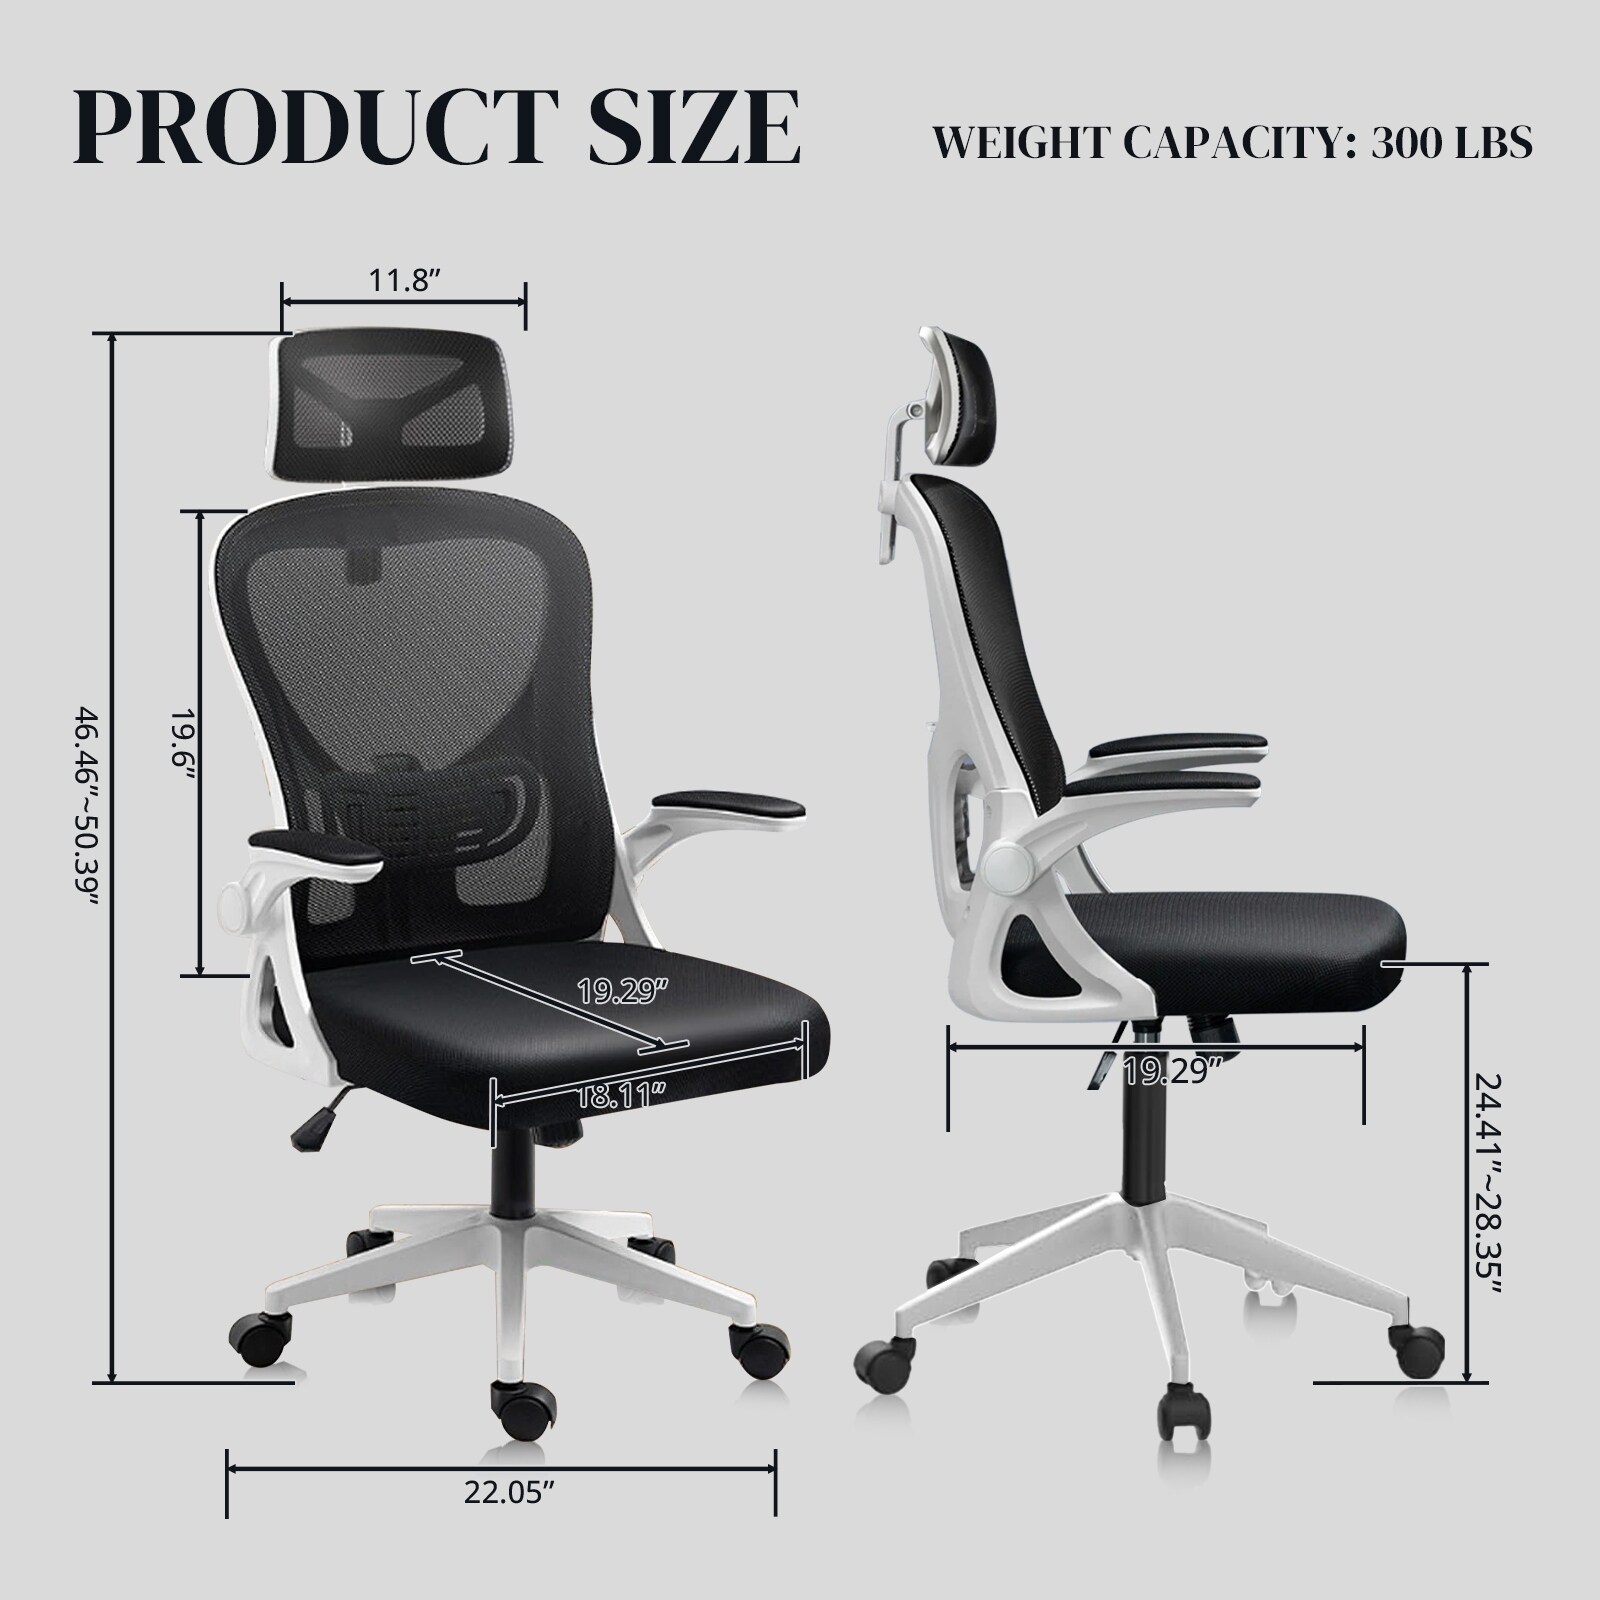 https://ak1.ostkcdn.com/images/products/is/images/direct/26b15f3a0dcc5f00169bb5efb64abc94c9104e24/Office-Chair%2C-Ergonomic-Desk-Chair%2C-High-Back-Faux-Leather-Task-Chairs-for-Home-Office-for-Adult-Working-Study.jpg